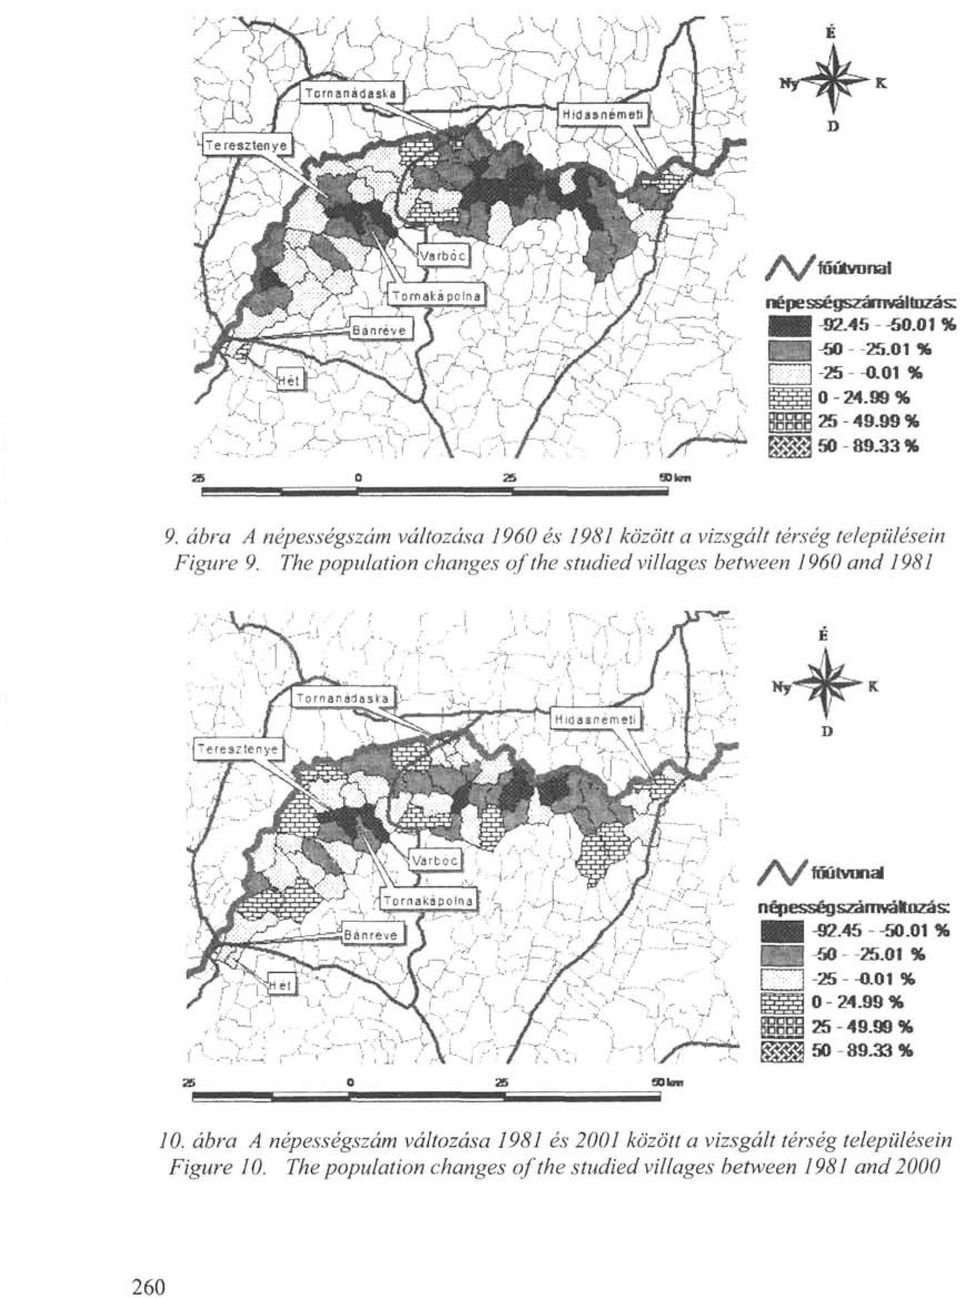 The population changes of the studied villages between 1960 and 1981 10.